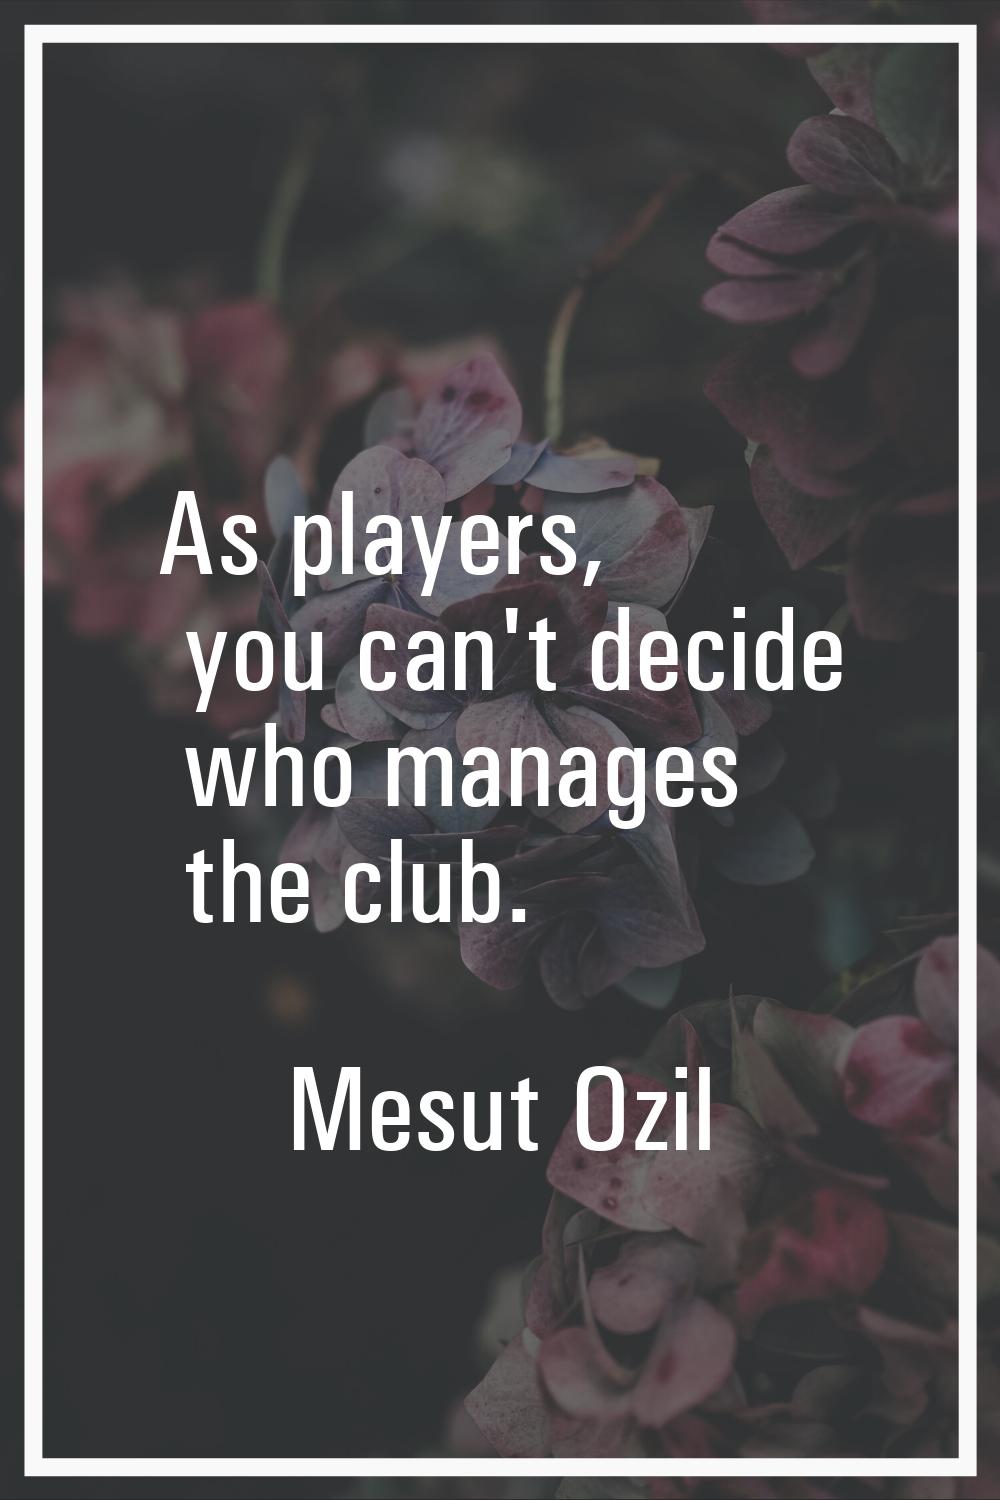 As players, you can't decide who manages the club.